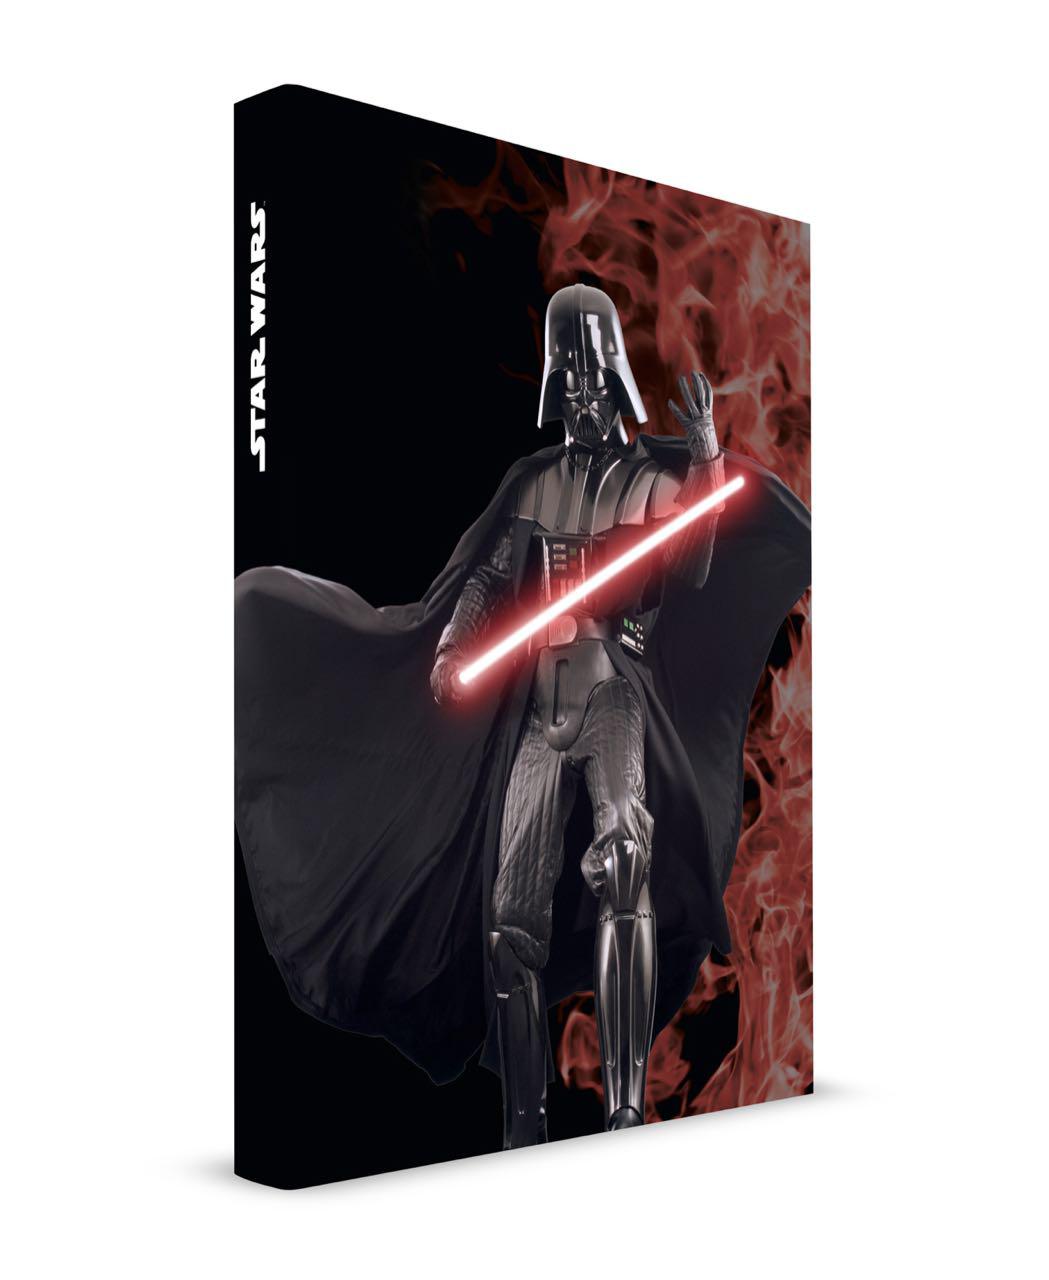 SW  Notebook Cahier Lumineux et Sonore Darth Vader 15x20cm